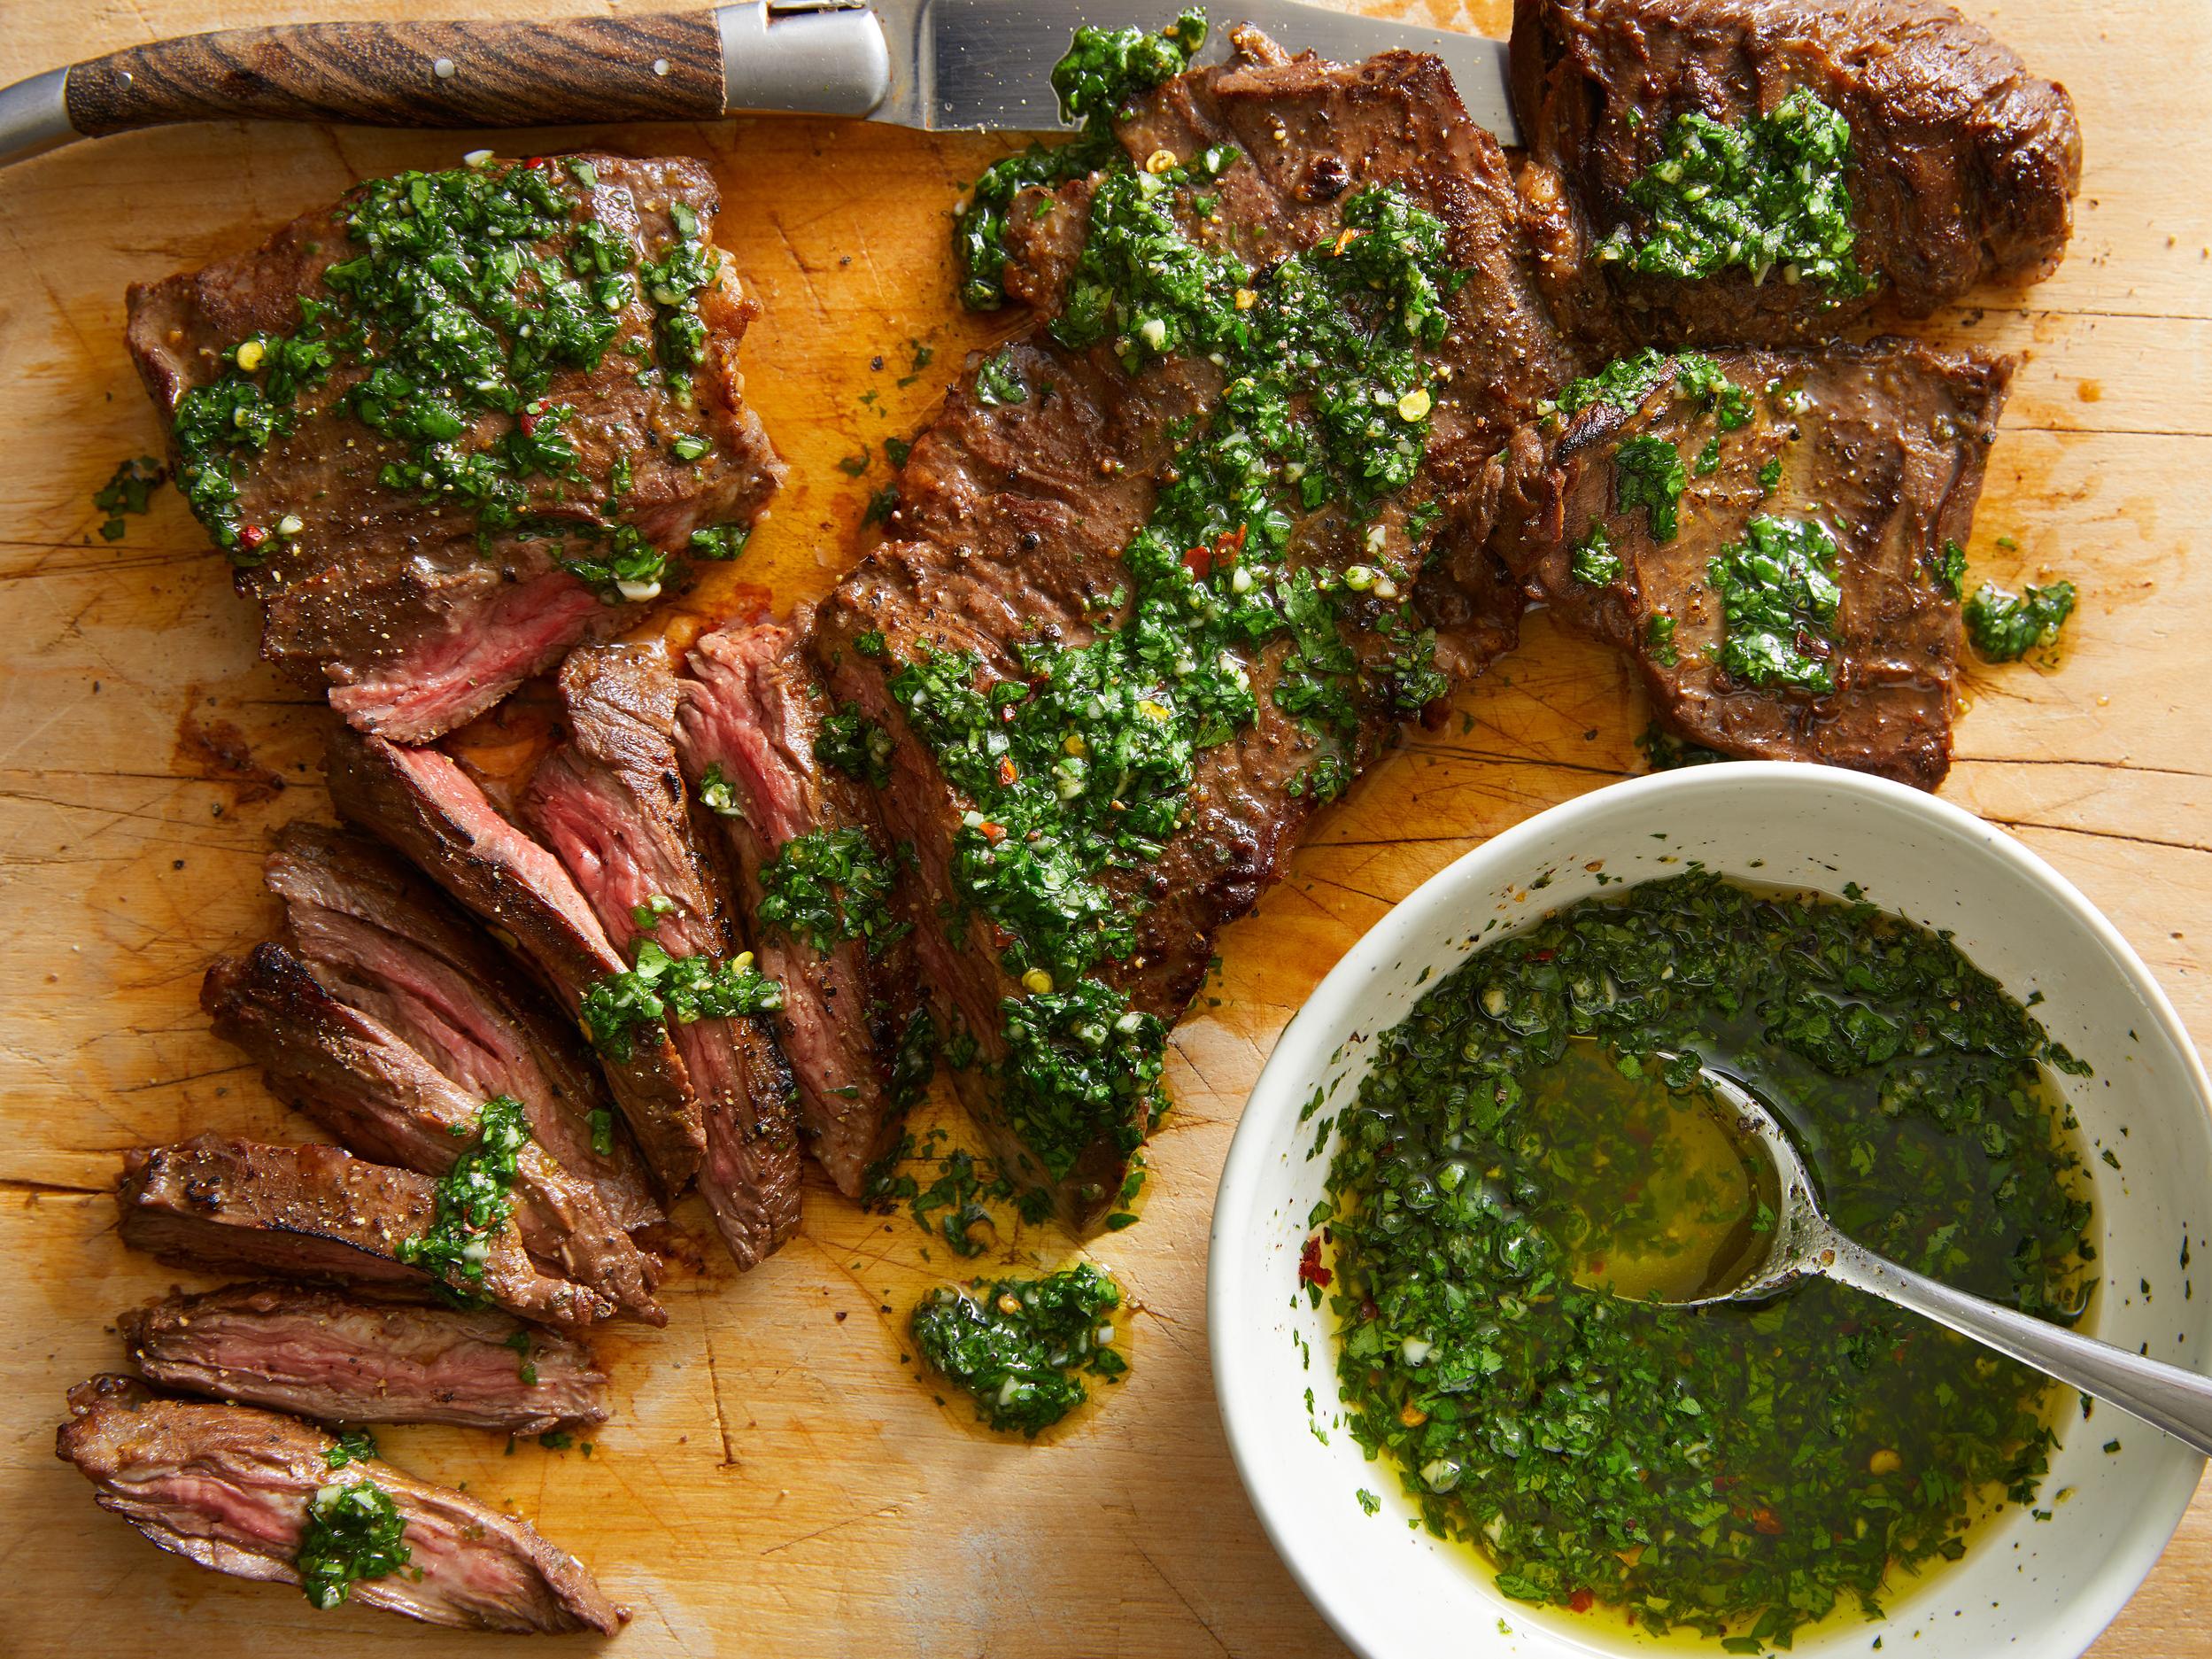  Vibrant green chimichurri sauce adds a pop of color to a rustic dish.